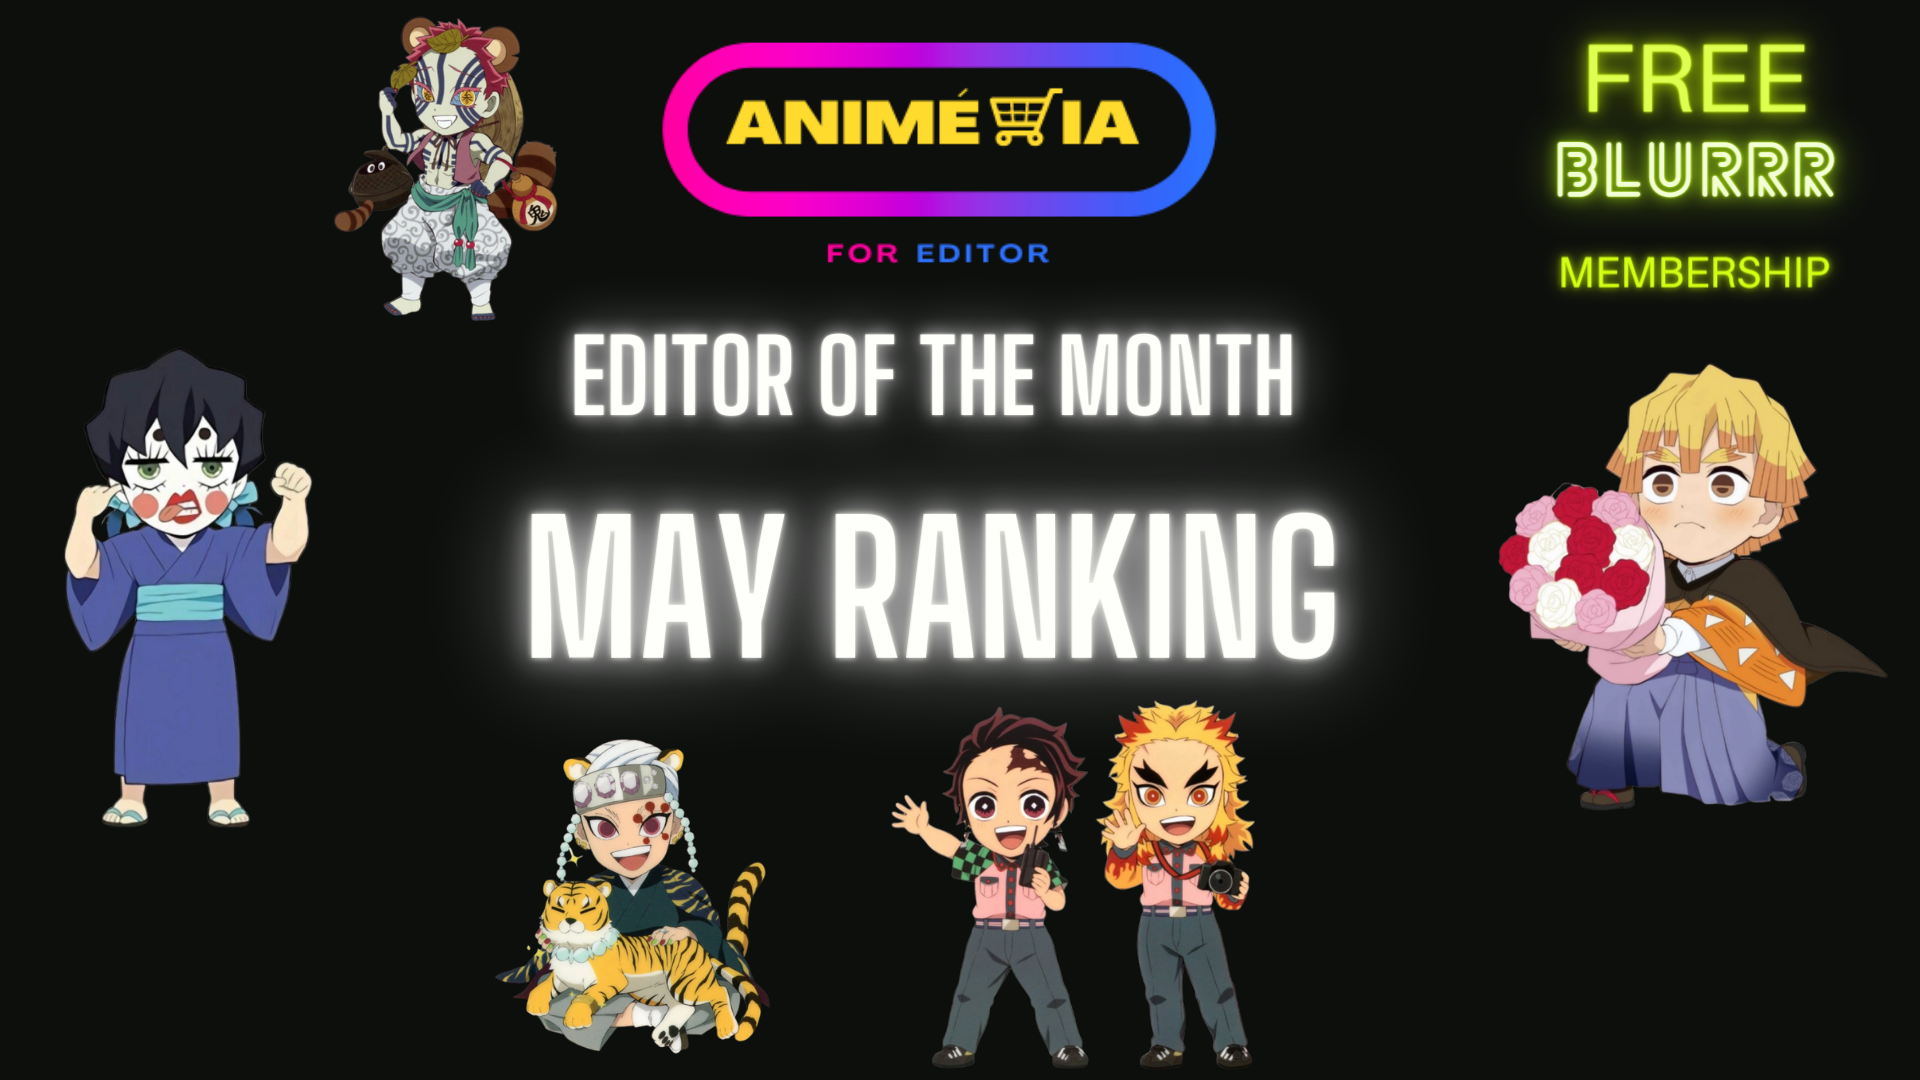 May Ranking “Editor of the Month”